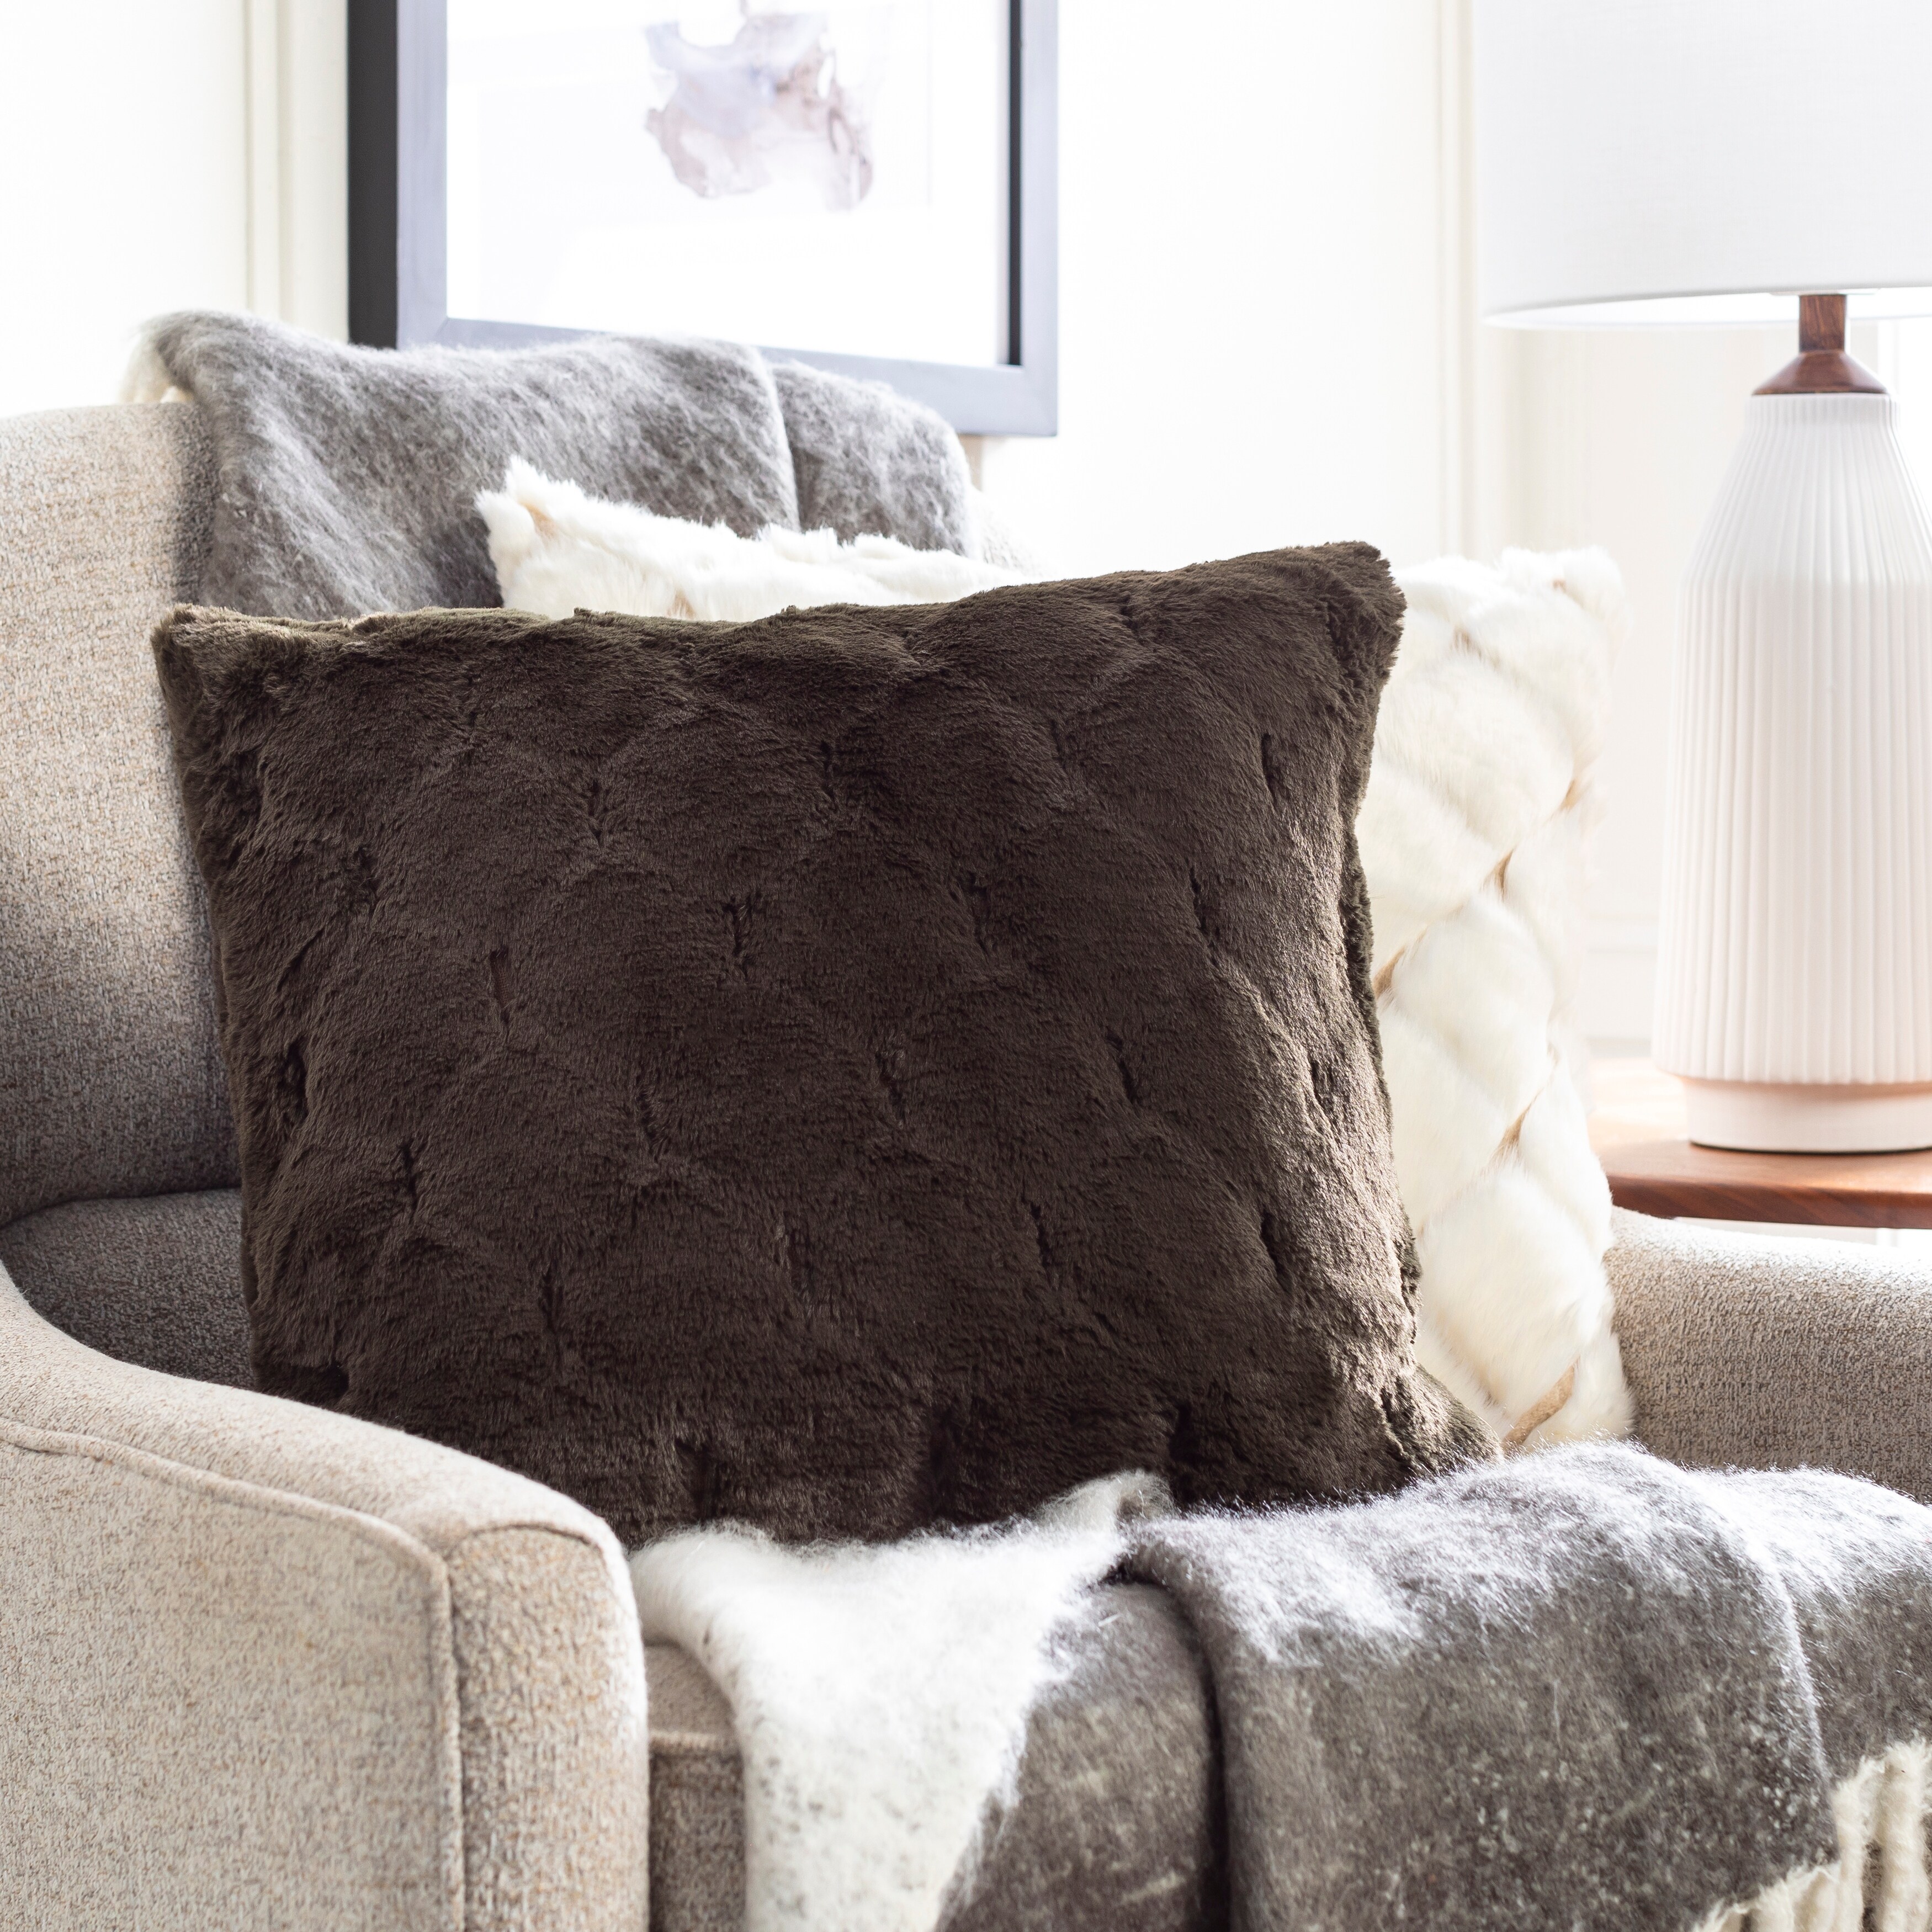 https://ak1.ostkcdn.com/images/products/is/images/direct/e802e2302b7ee19a1d055a701f0bcc74d9363cc8/Macie-Faux-Fur-Cozy-Modern-Throw-Pillow.jpg